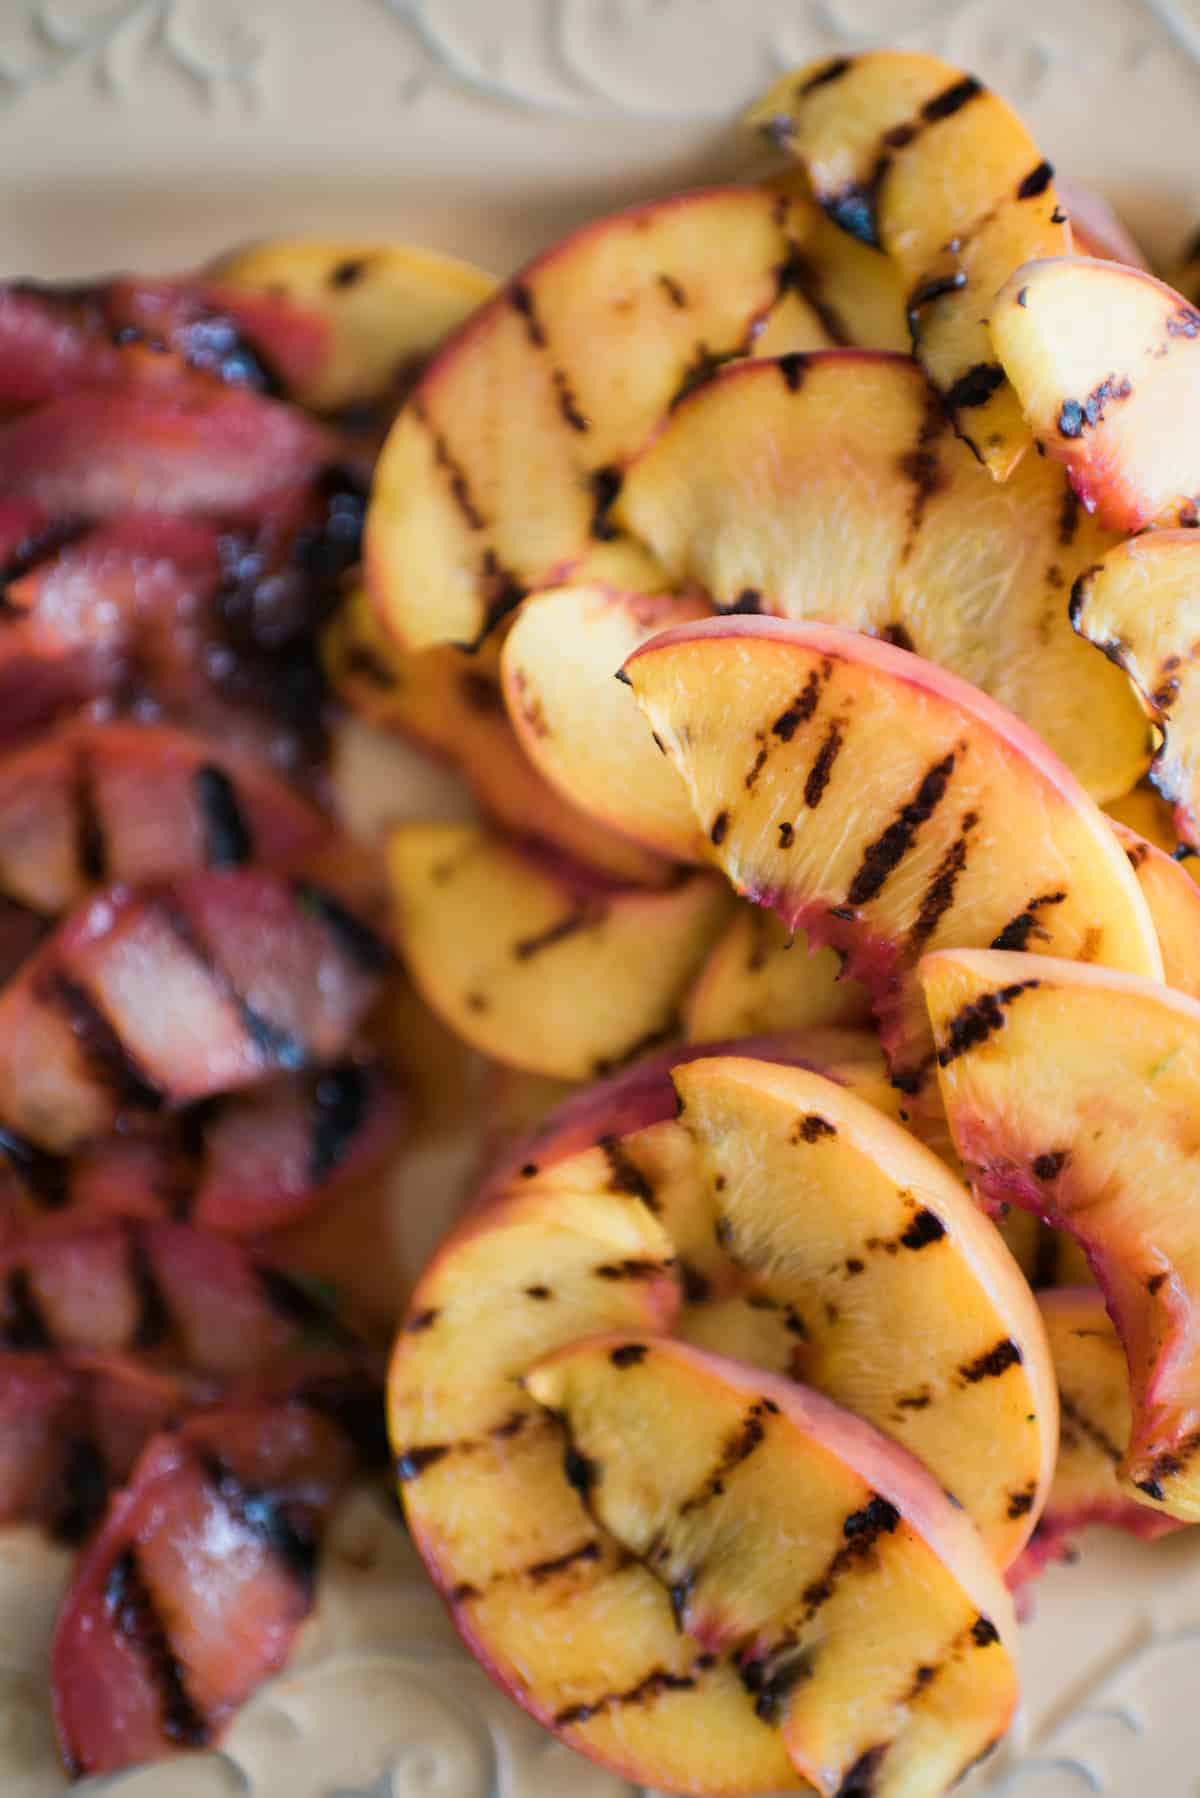 close up of grilled stone fruits like peaches and plums.